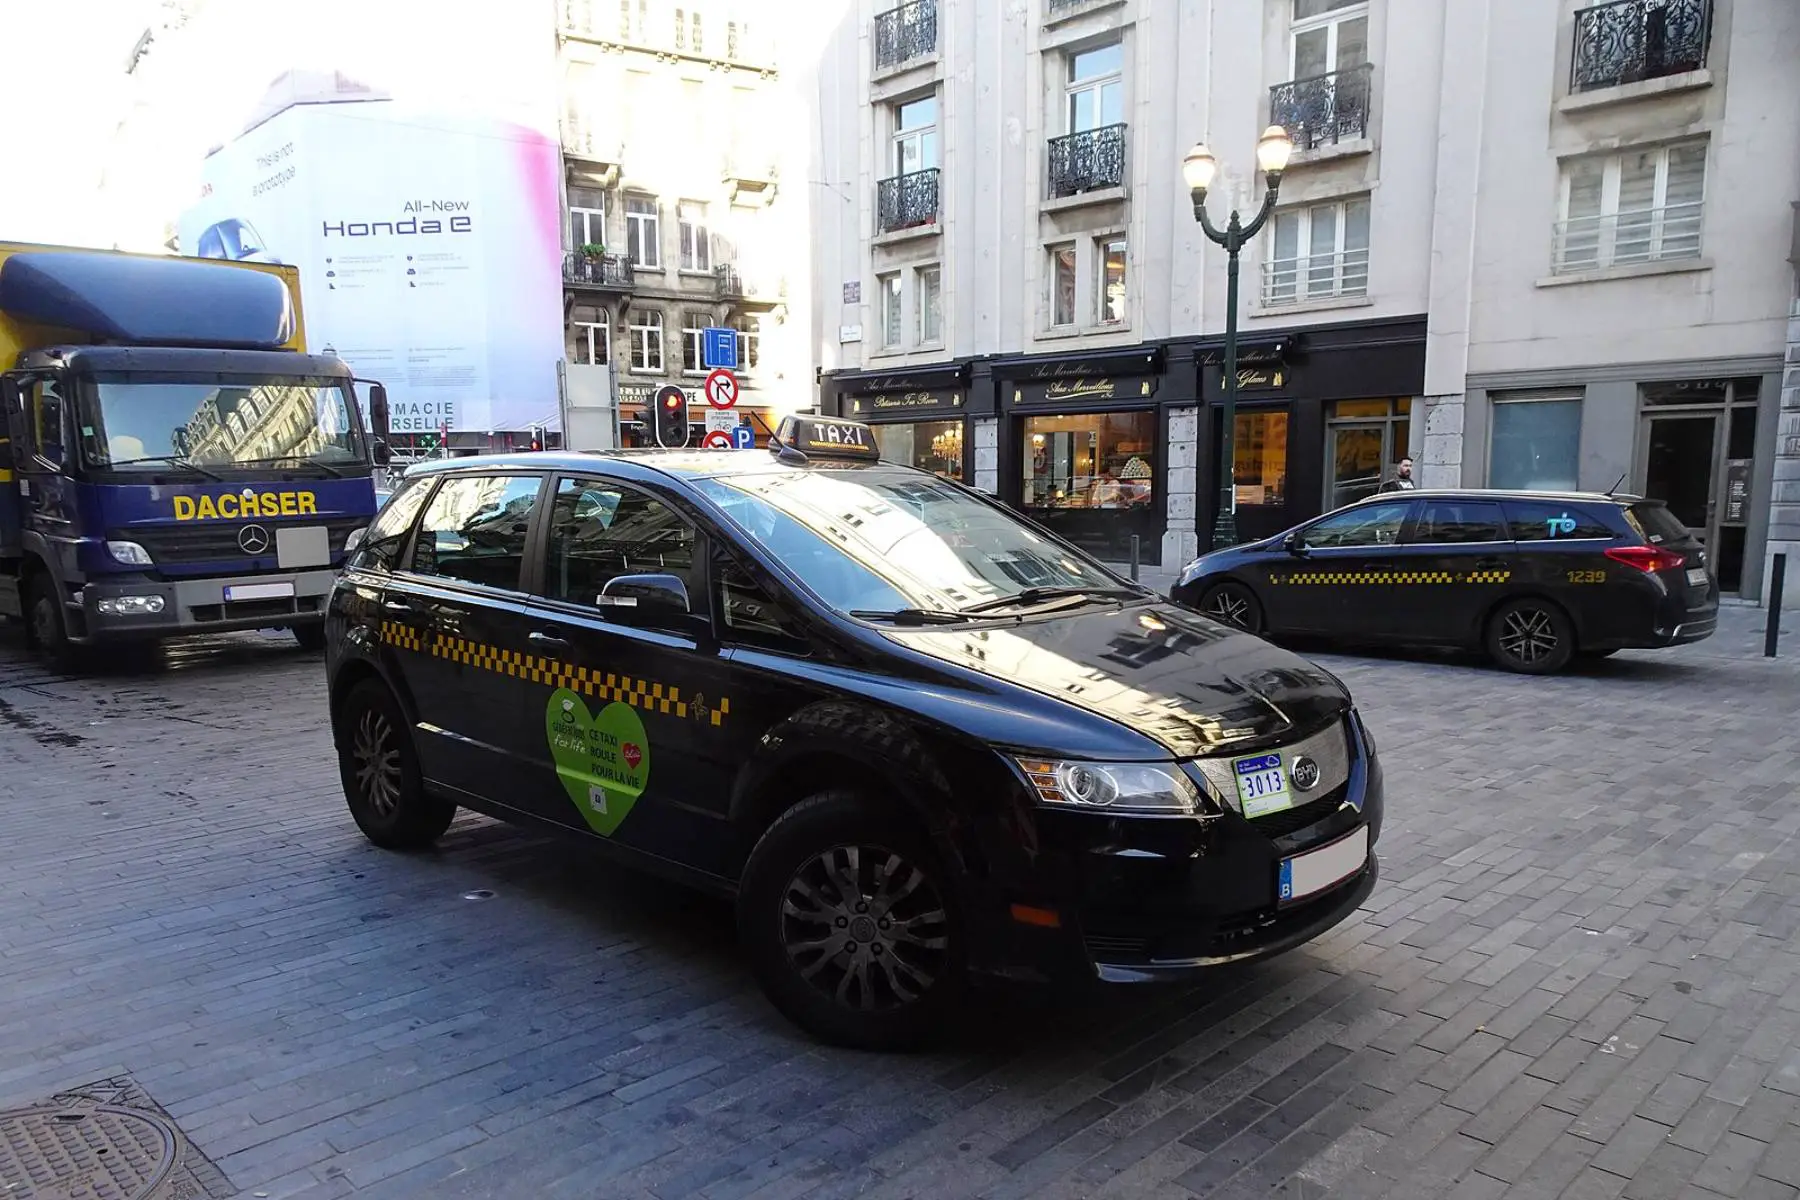 A taxi in Brussels, Belgium